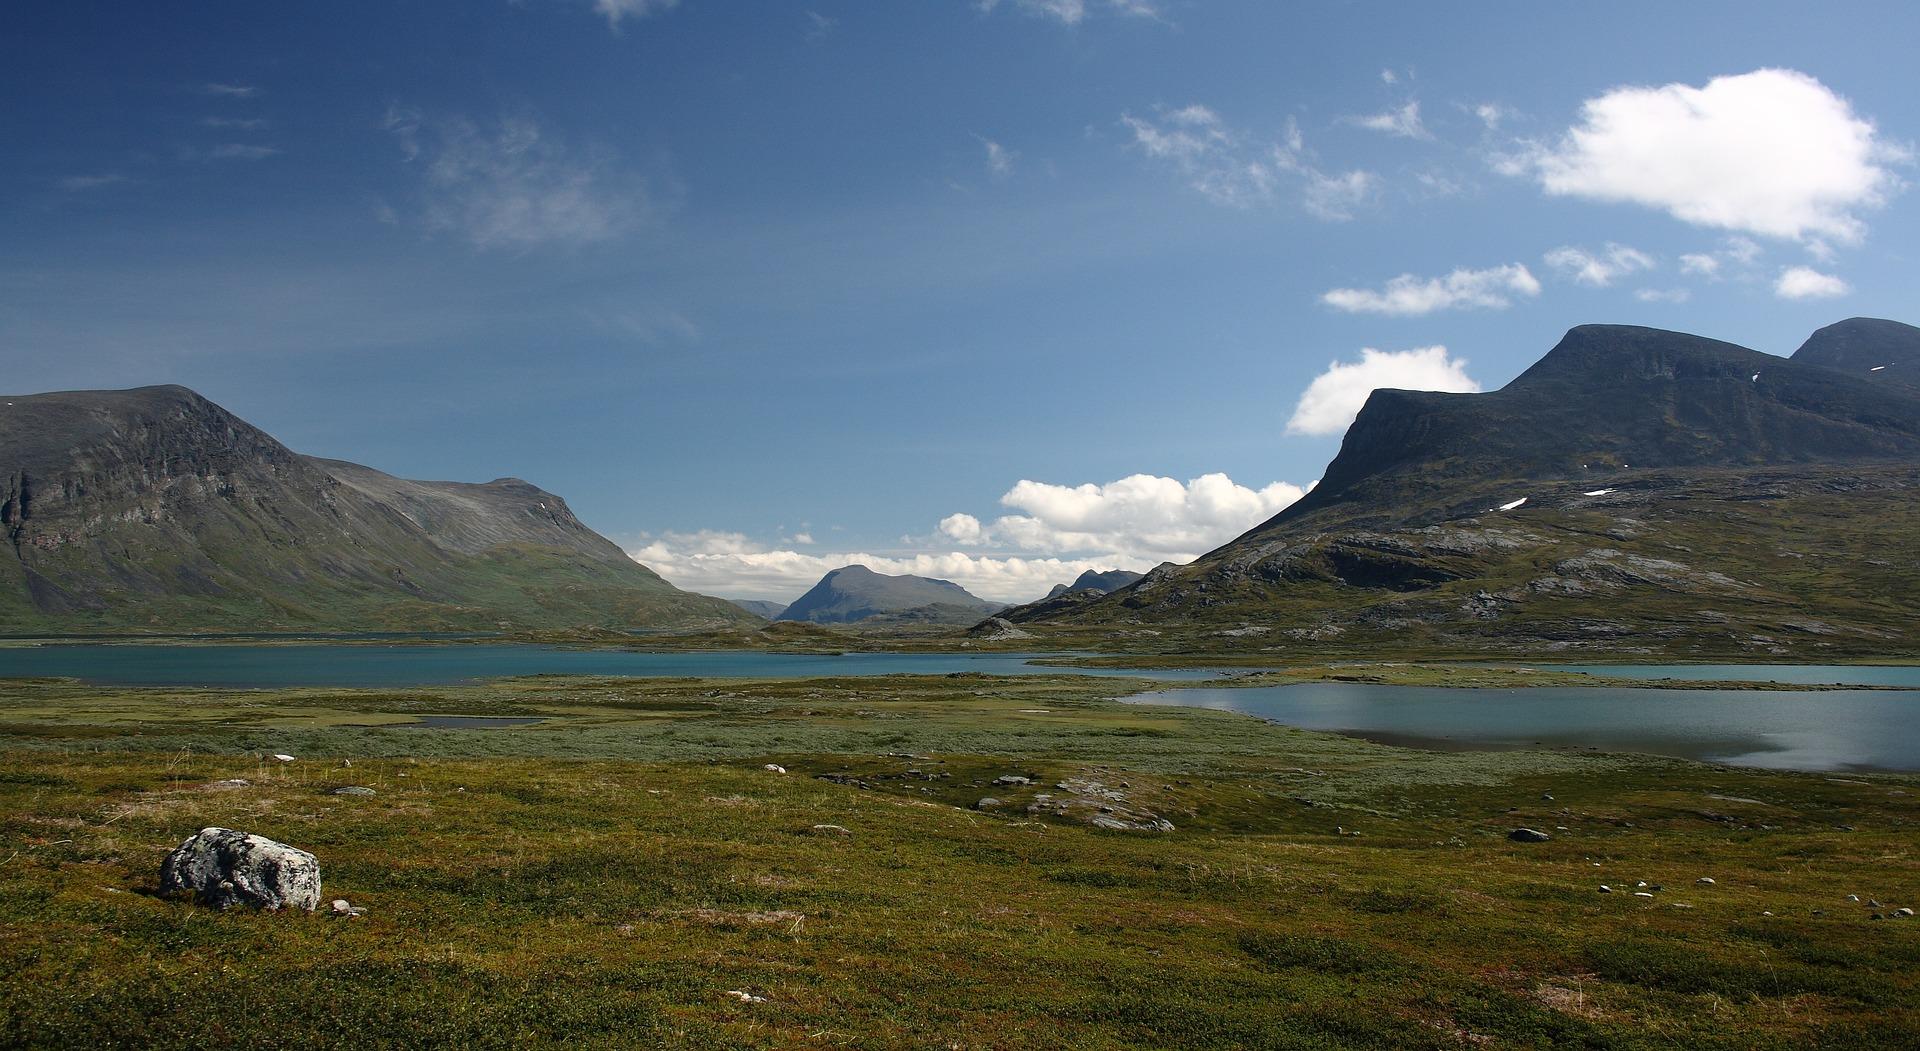 Sweden: landscape with mountains and lake.